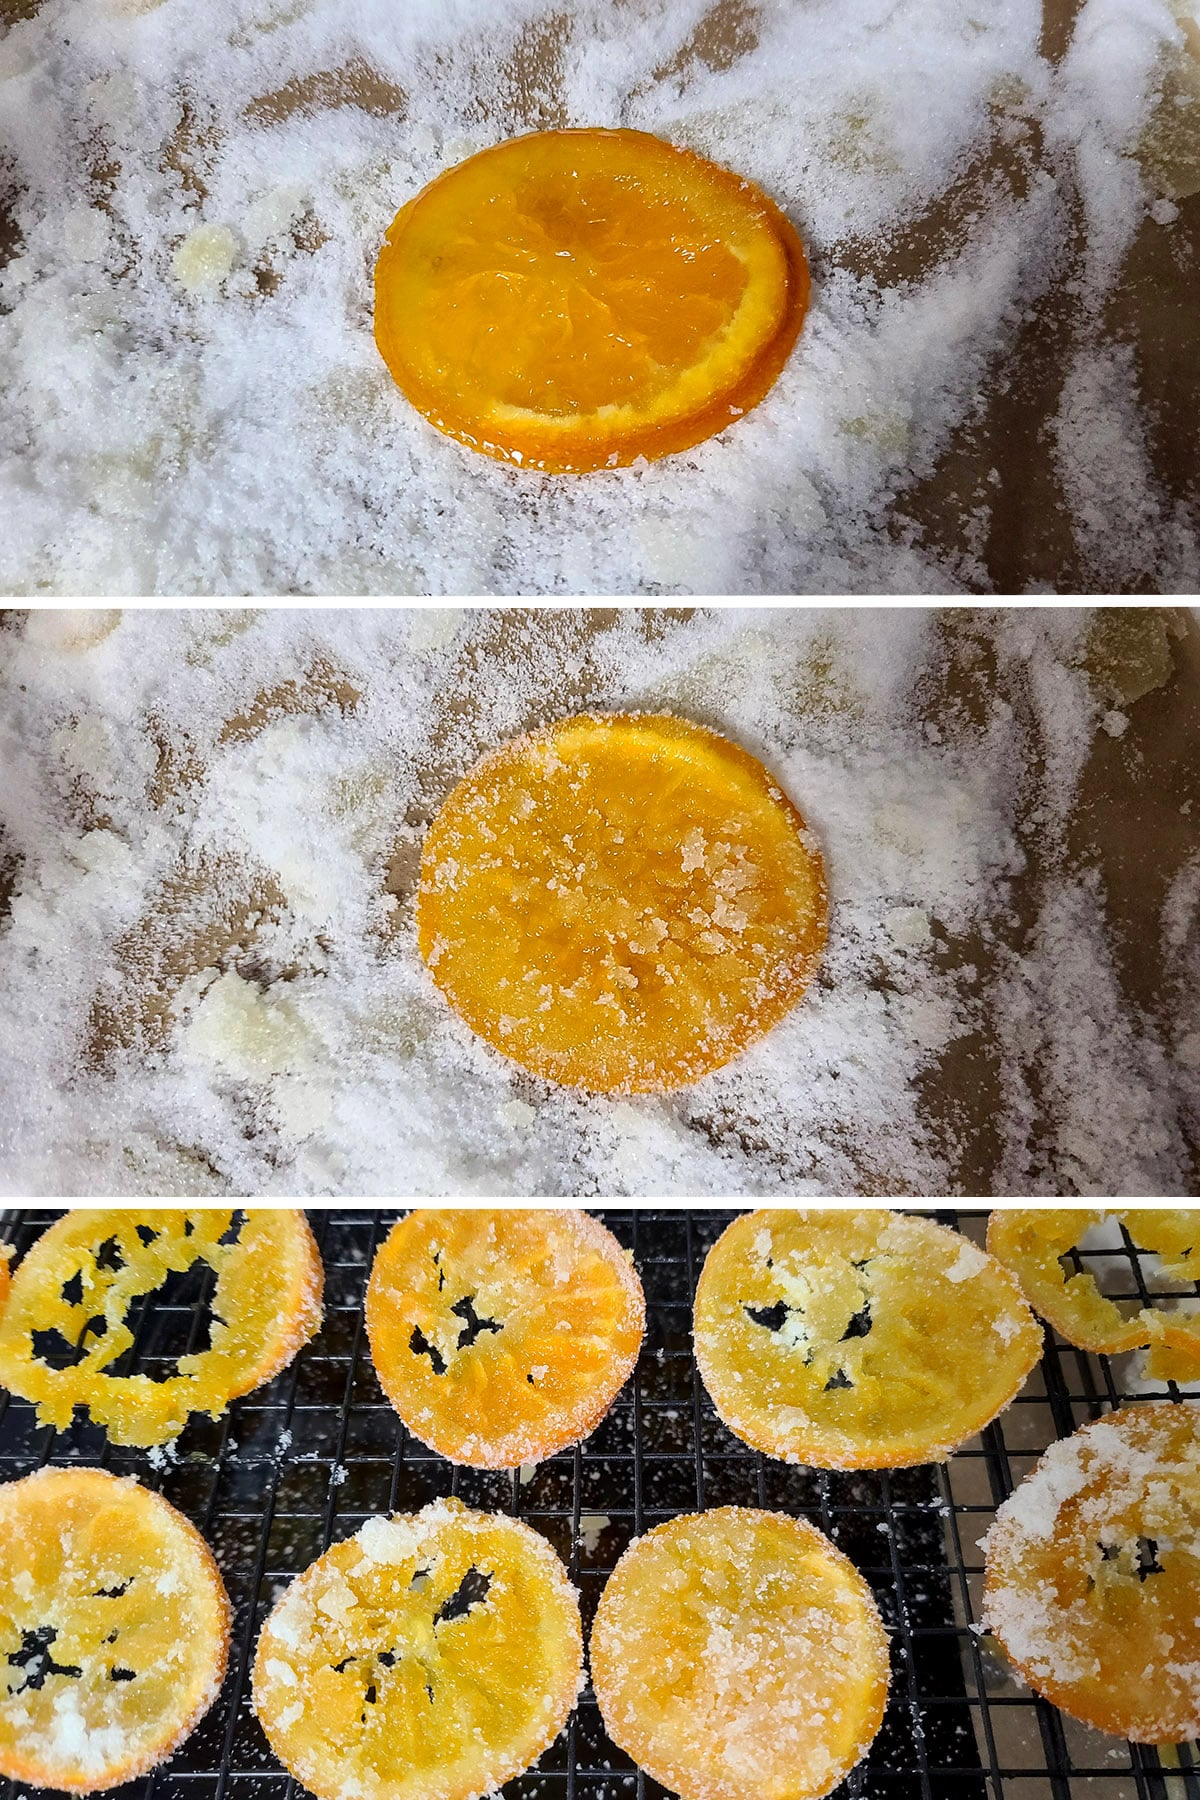 A 3 part image showing a syruppy orange slice being coated in sugar and set on a drying rack with other sugared slices.